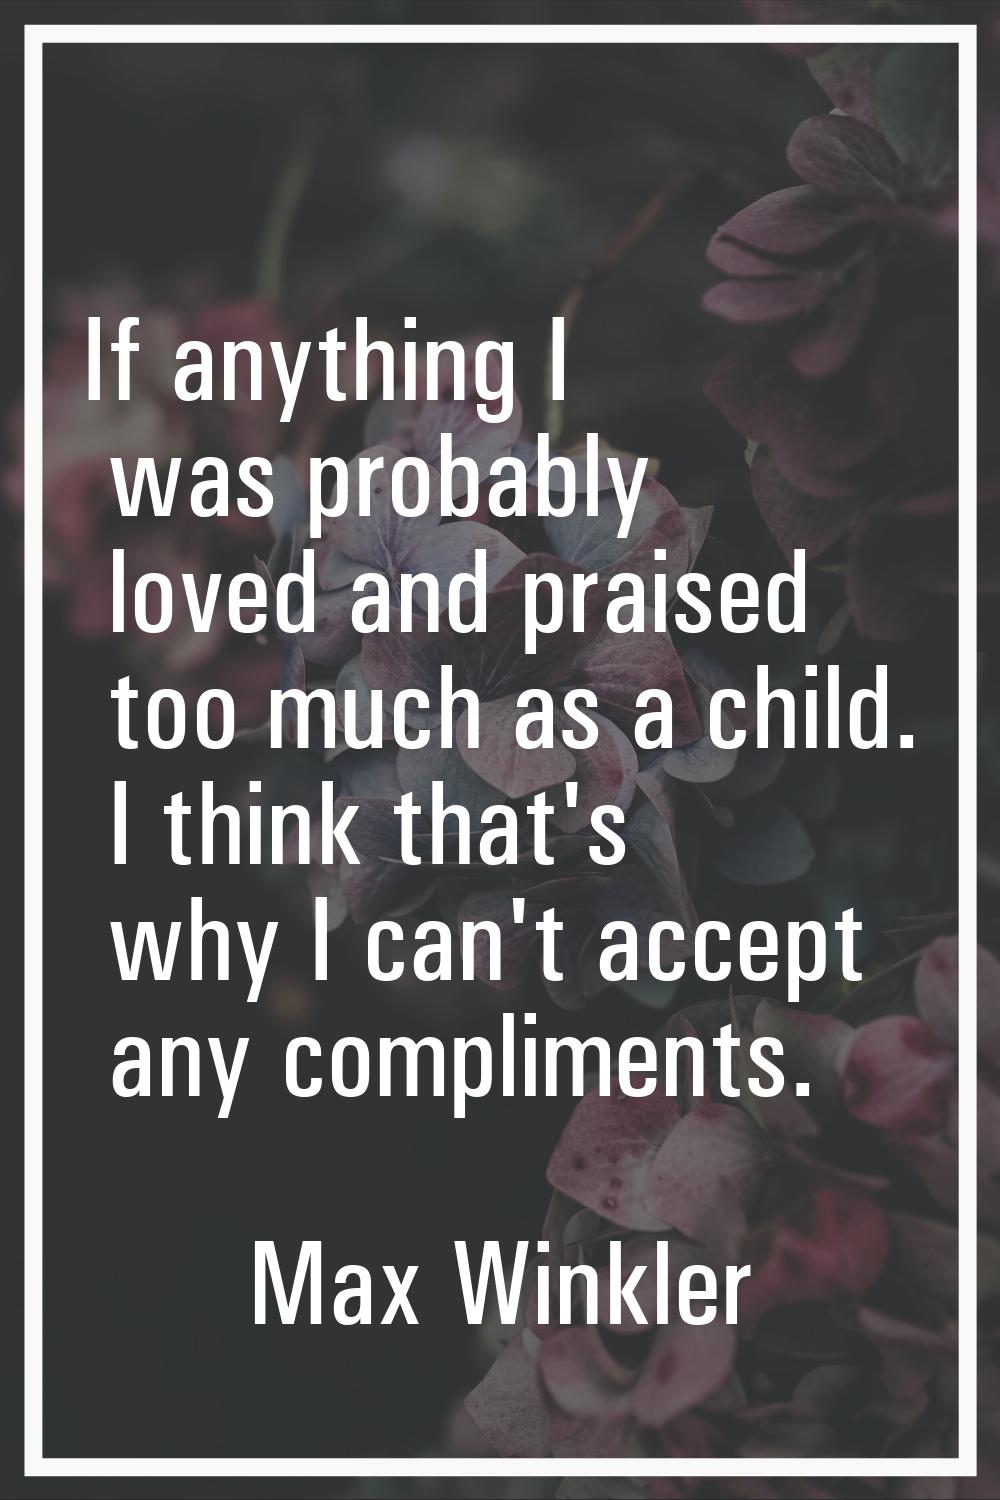 If anything I was probably loved and praised too much as a child. I think that's why I can't accept